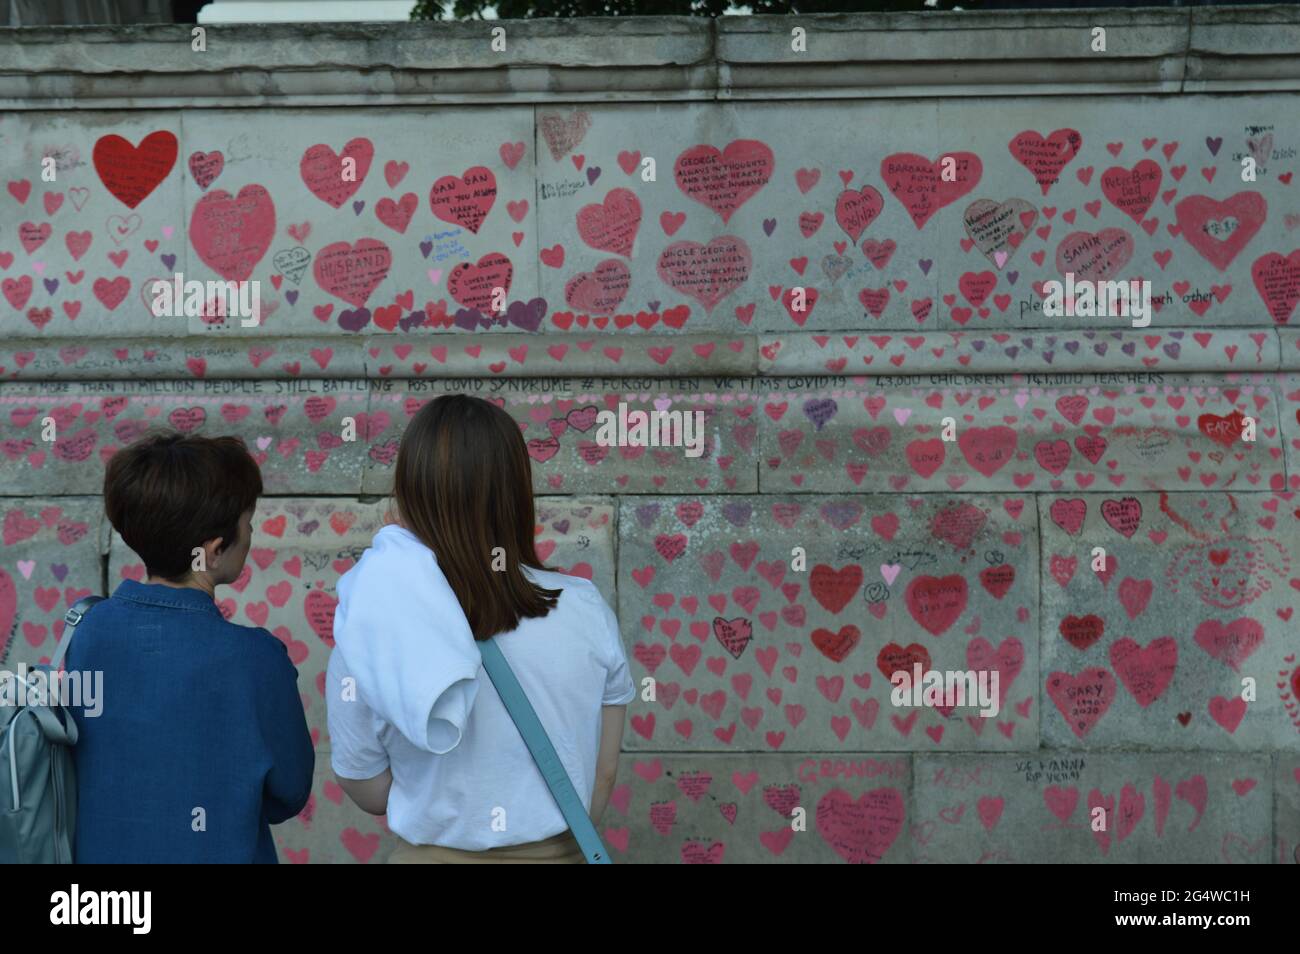 London, UK. 23 June 2021. Two women reading the tributes written on The National COVID Memorial Wall covered in hand drawn love hearts. Stock Photo